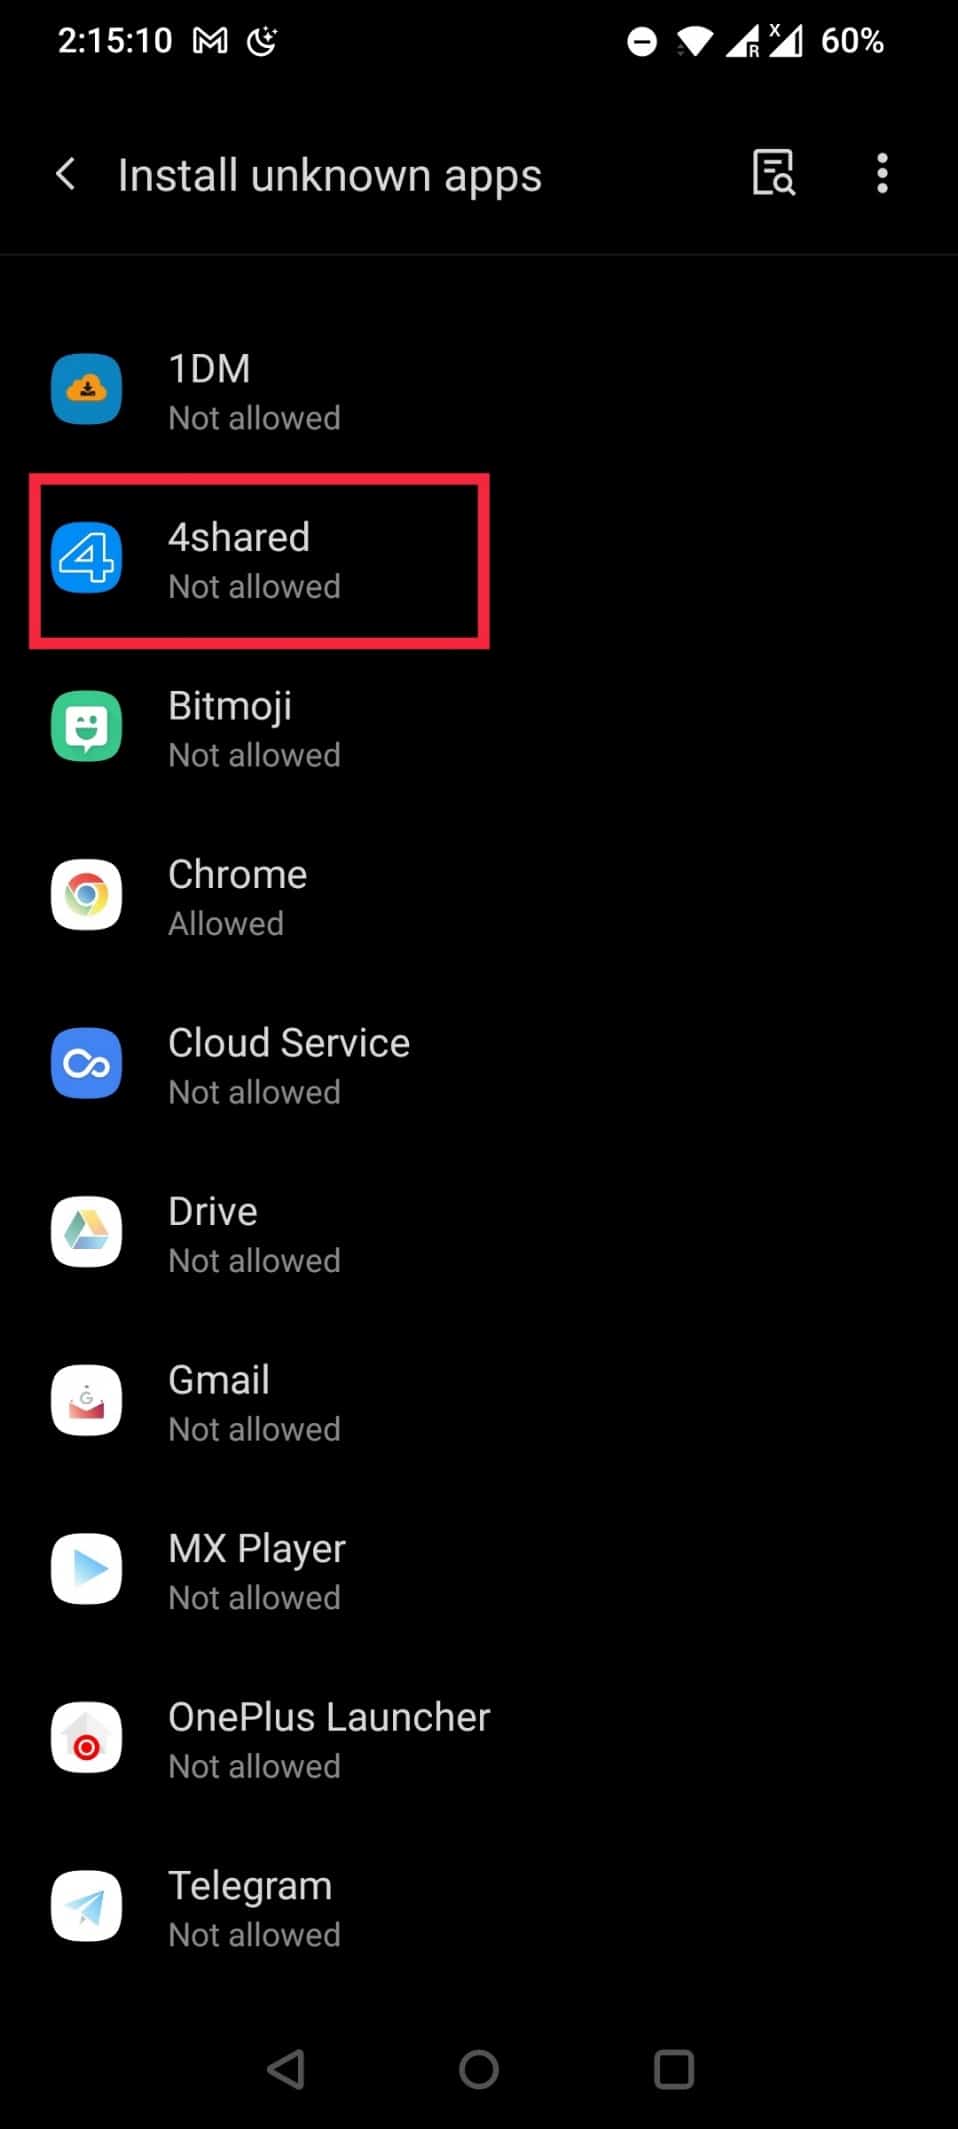 In this list of apps, find the installed app from the list below 4shared considered here and tap on it to open some options.